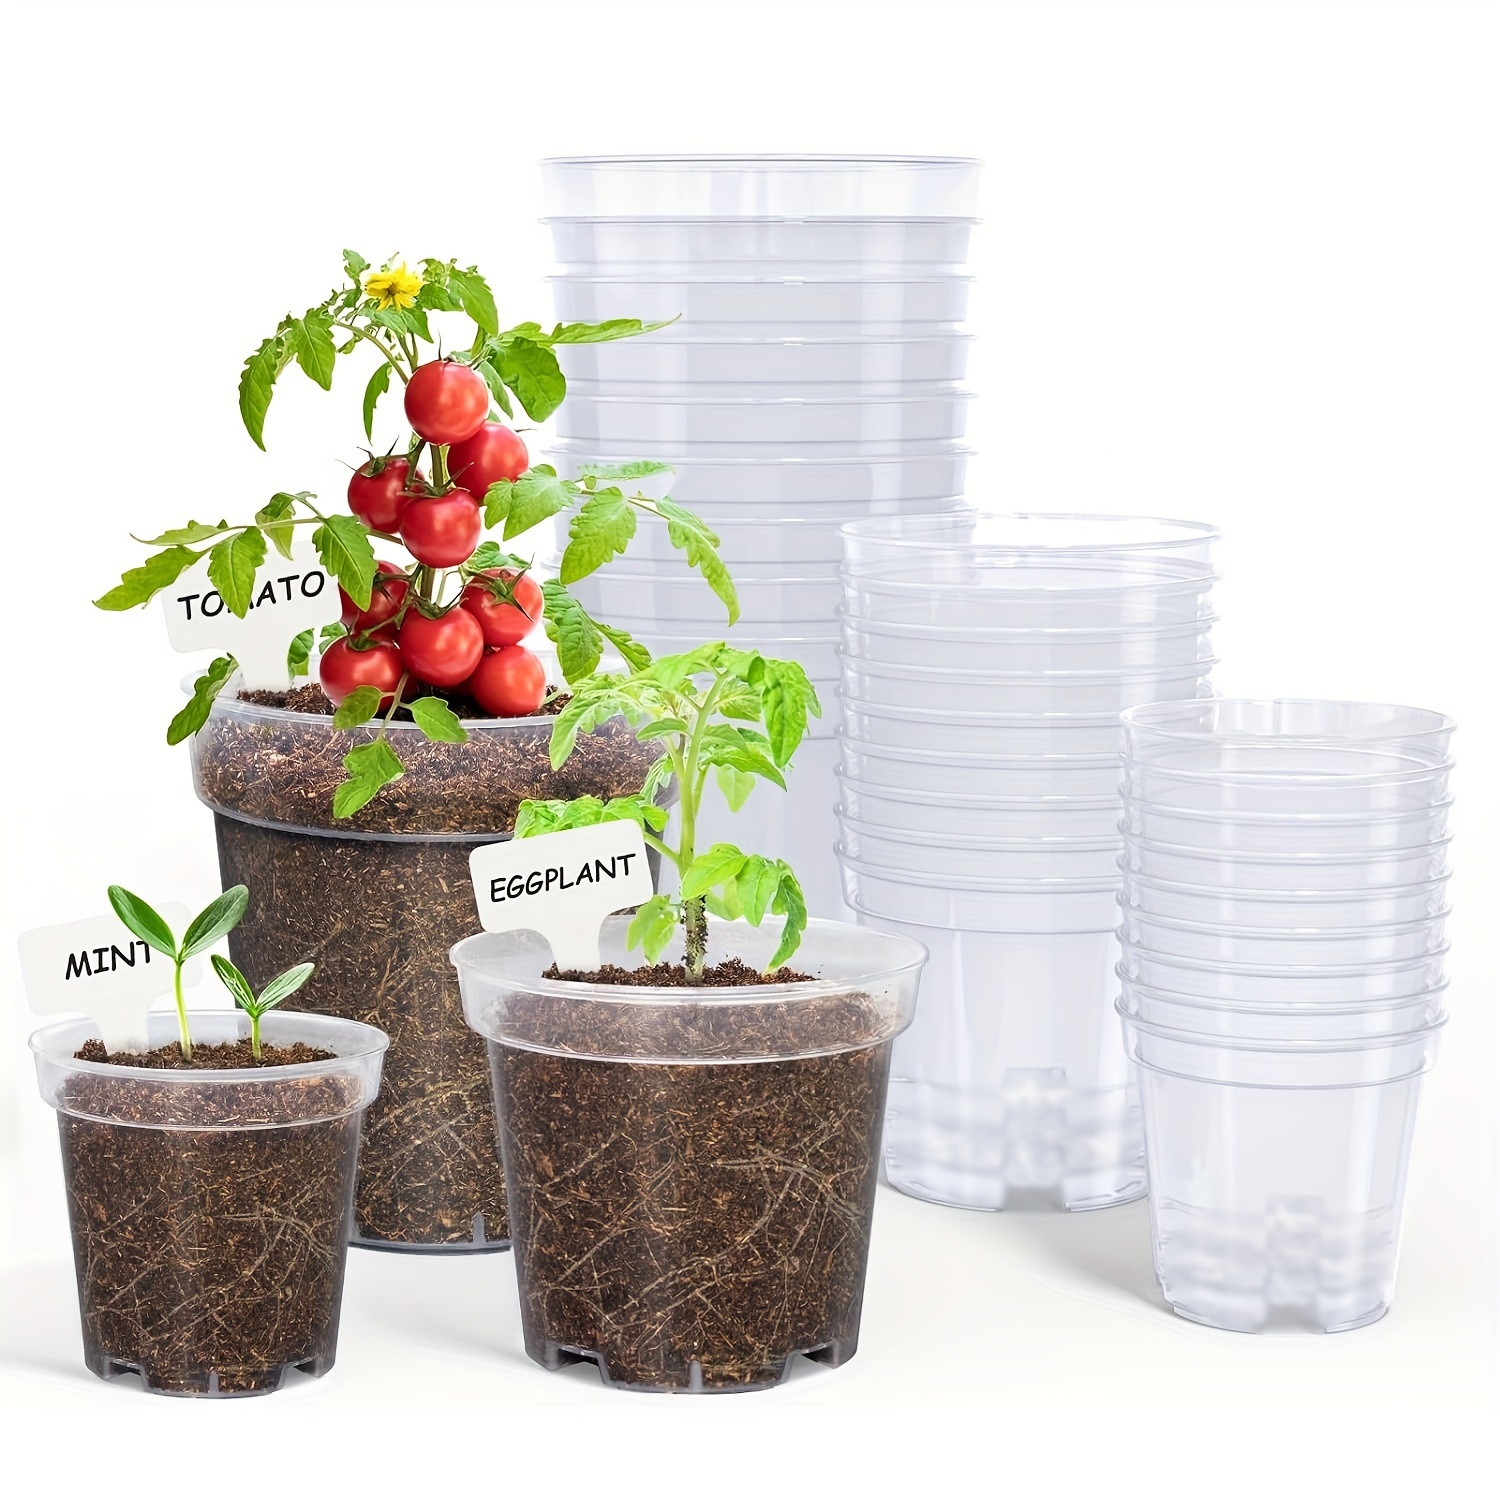 

10pcs, Clear Plastic Nursery Pots With Drainage Holes, 3/4/5 Inch Seedling Plant Pots For Indoor Outdoor Gardening, High Transparency Flower Pots For Seed Starting, Bonus Seed Starter Pot Included